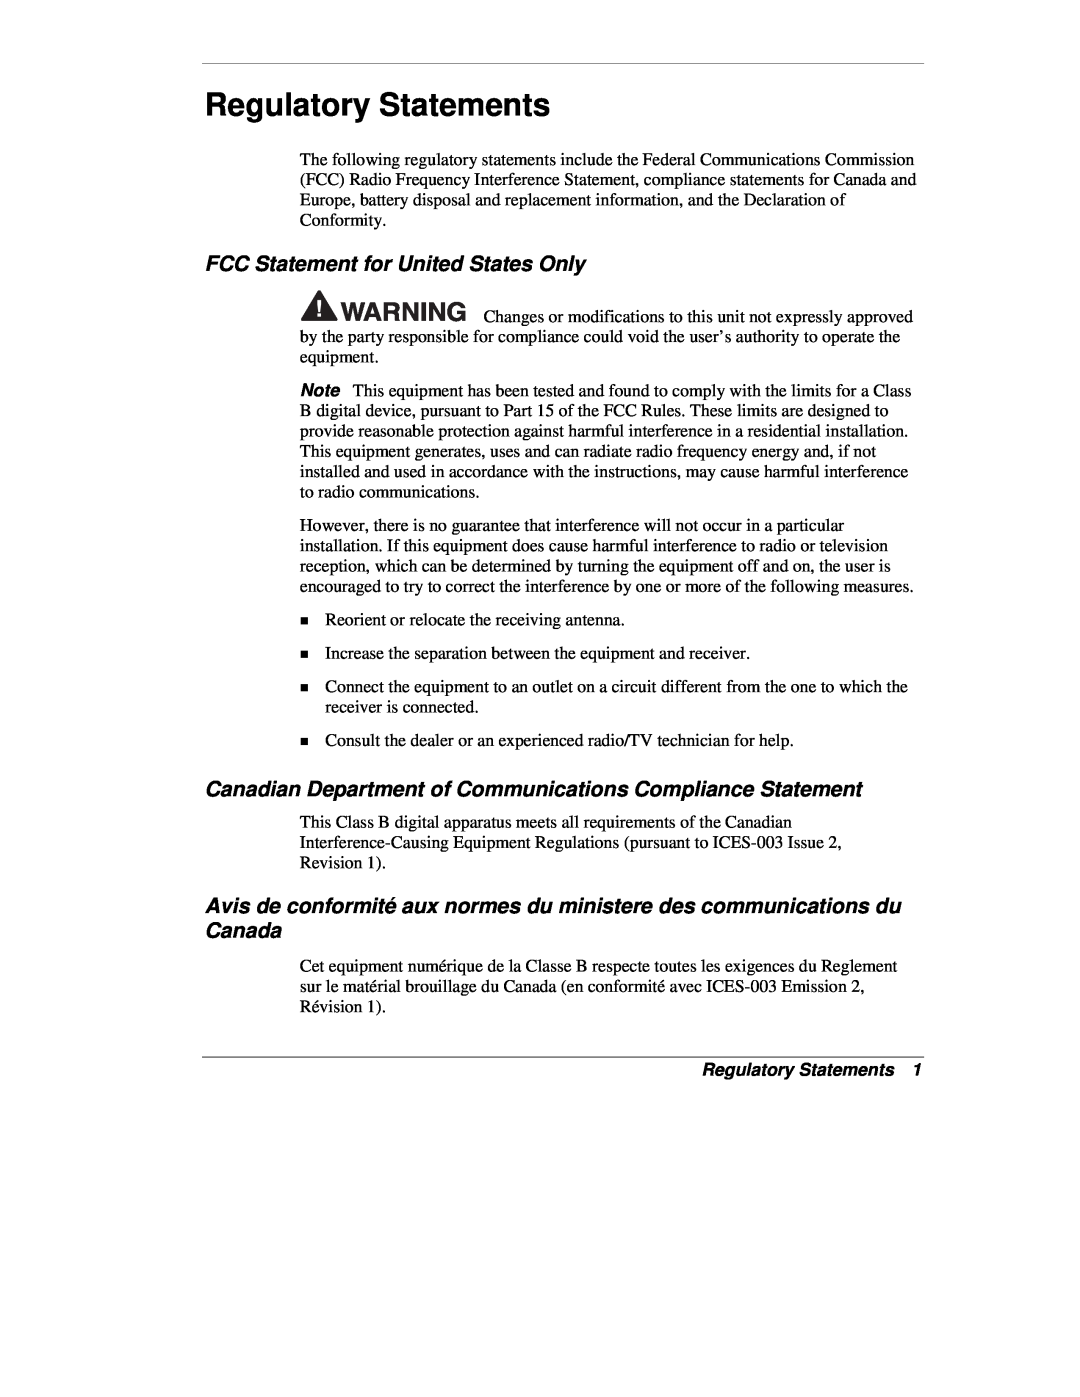 NEC VX manual Regulatory Statements, FCC Statement for United States Only 